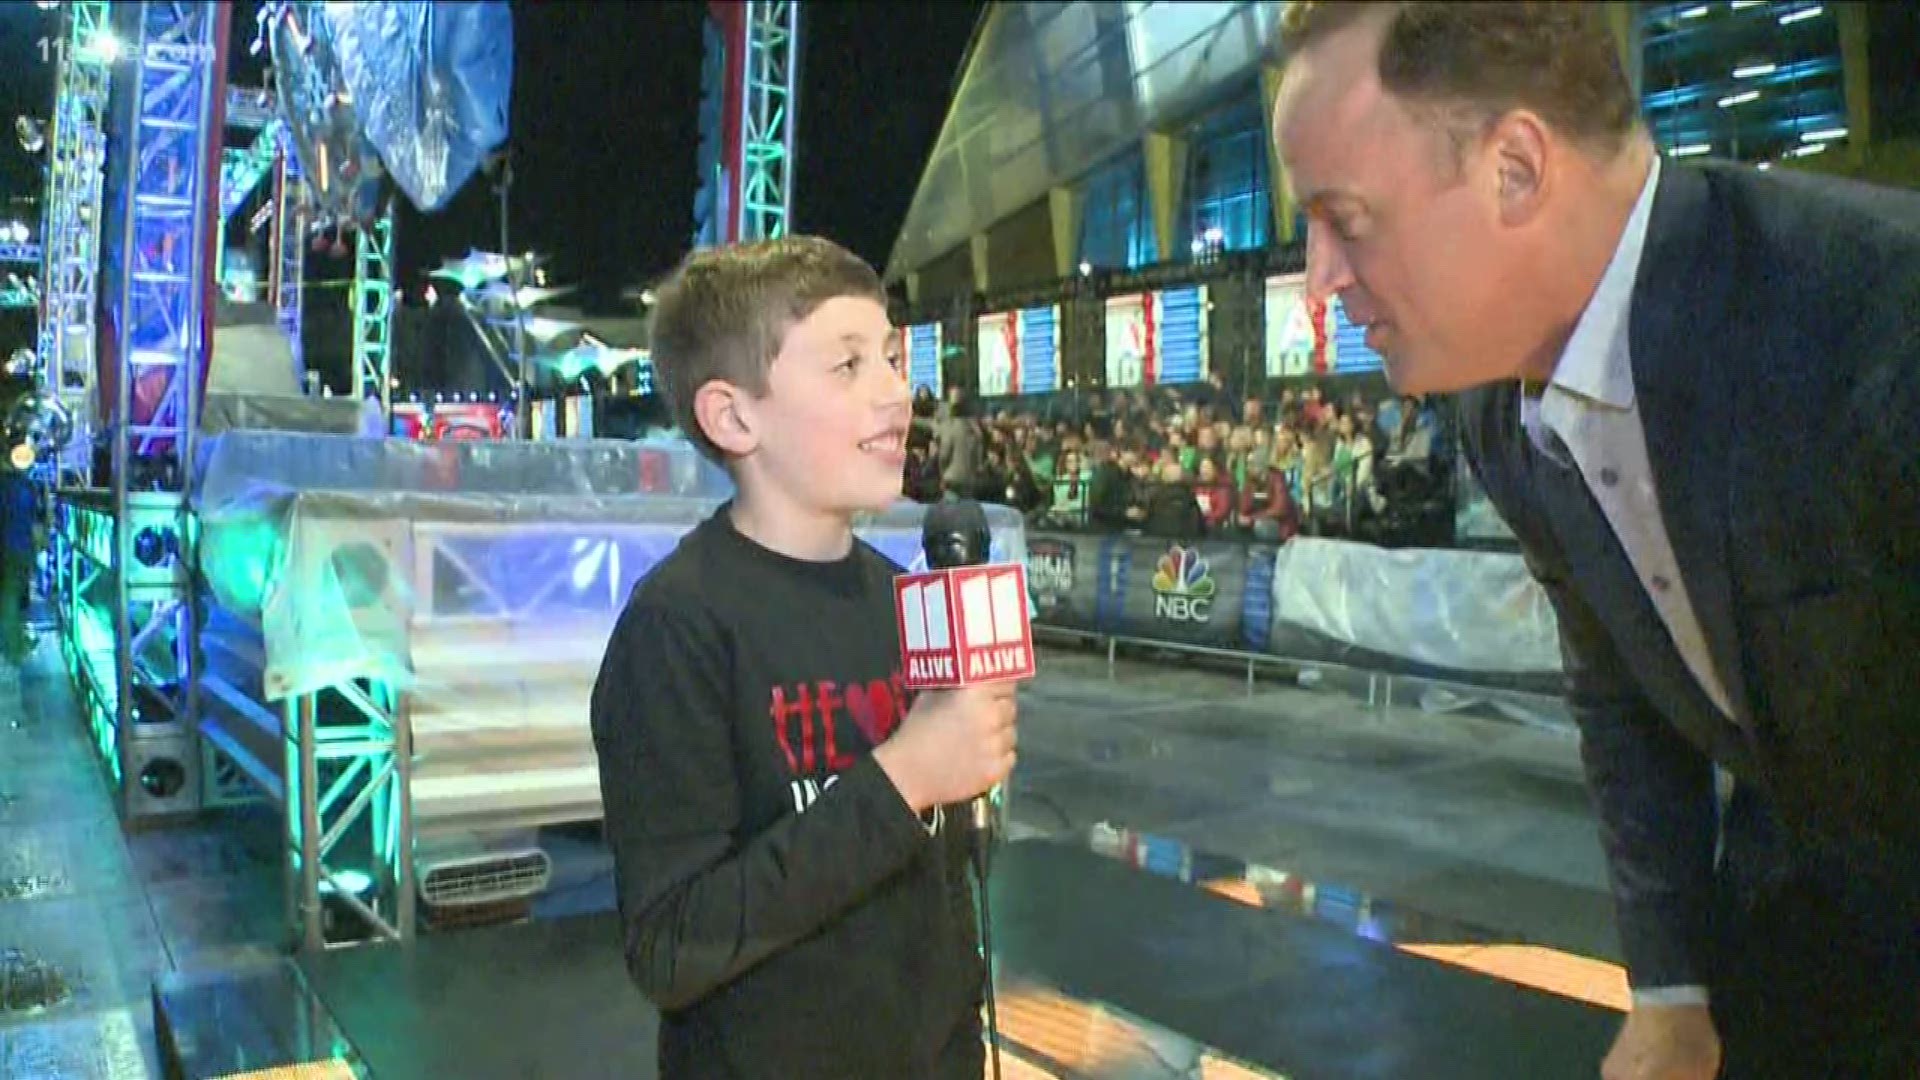 11Alive took Nathan along to be our reporter on the scene!